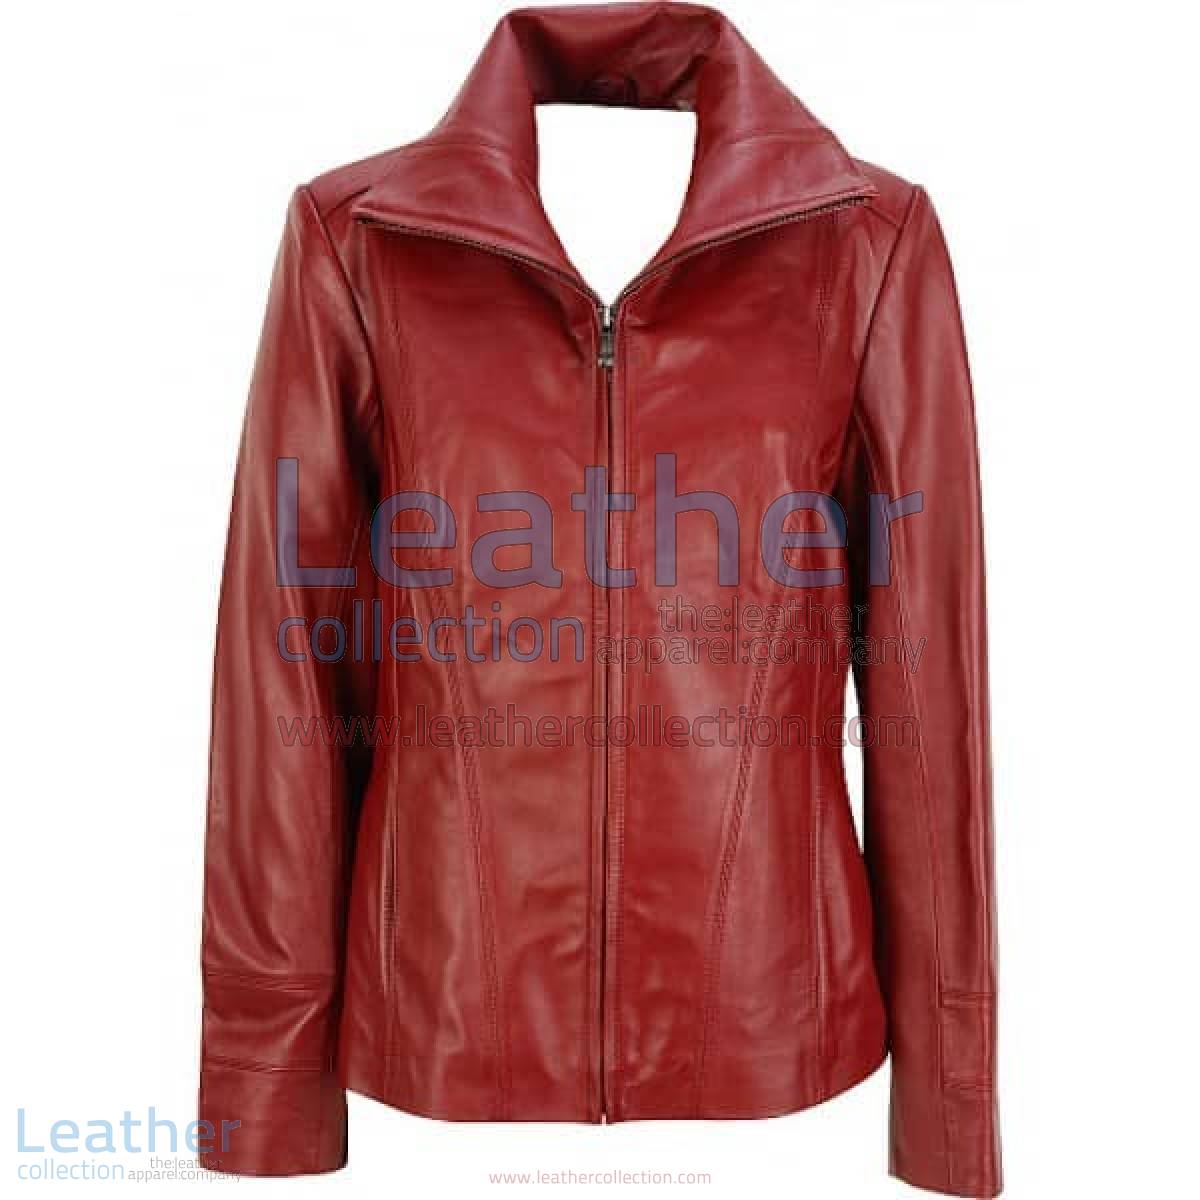 Dark Red Leather Fashion Jacket | red leather jacket,leather fashion jacket